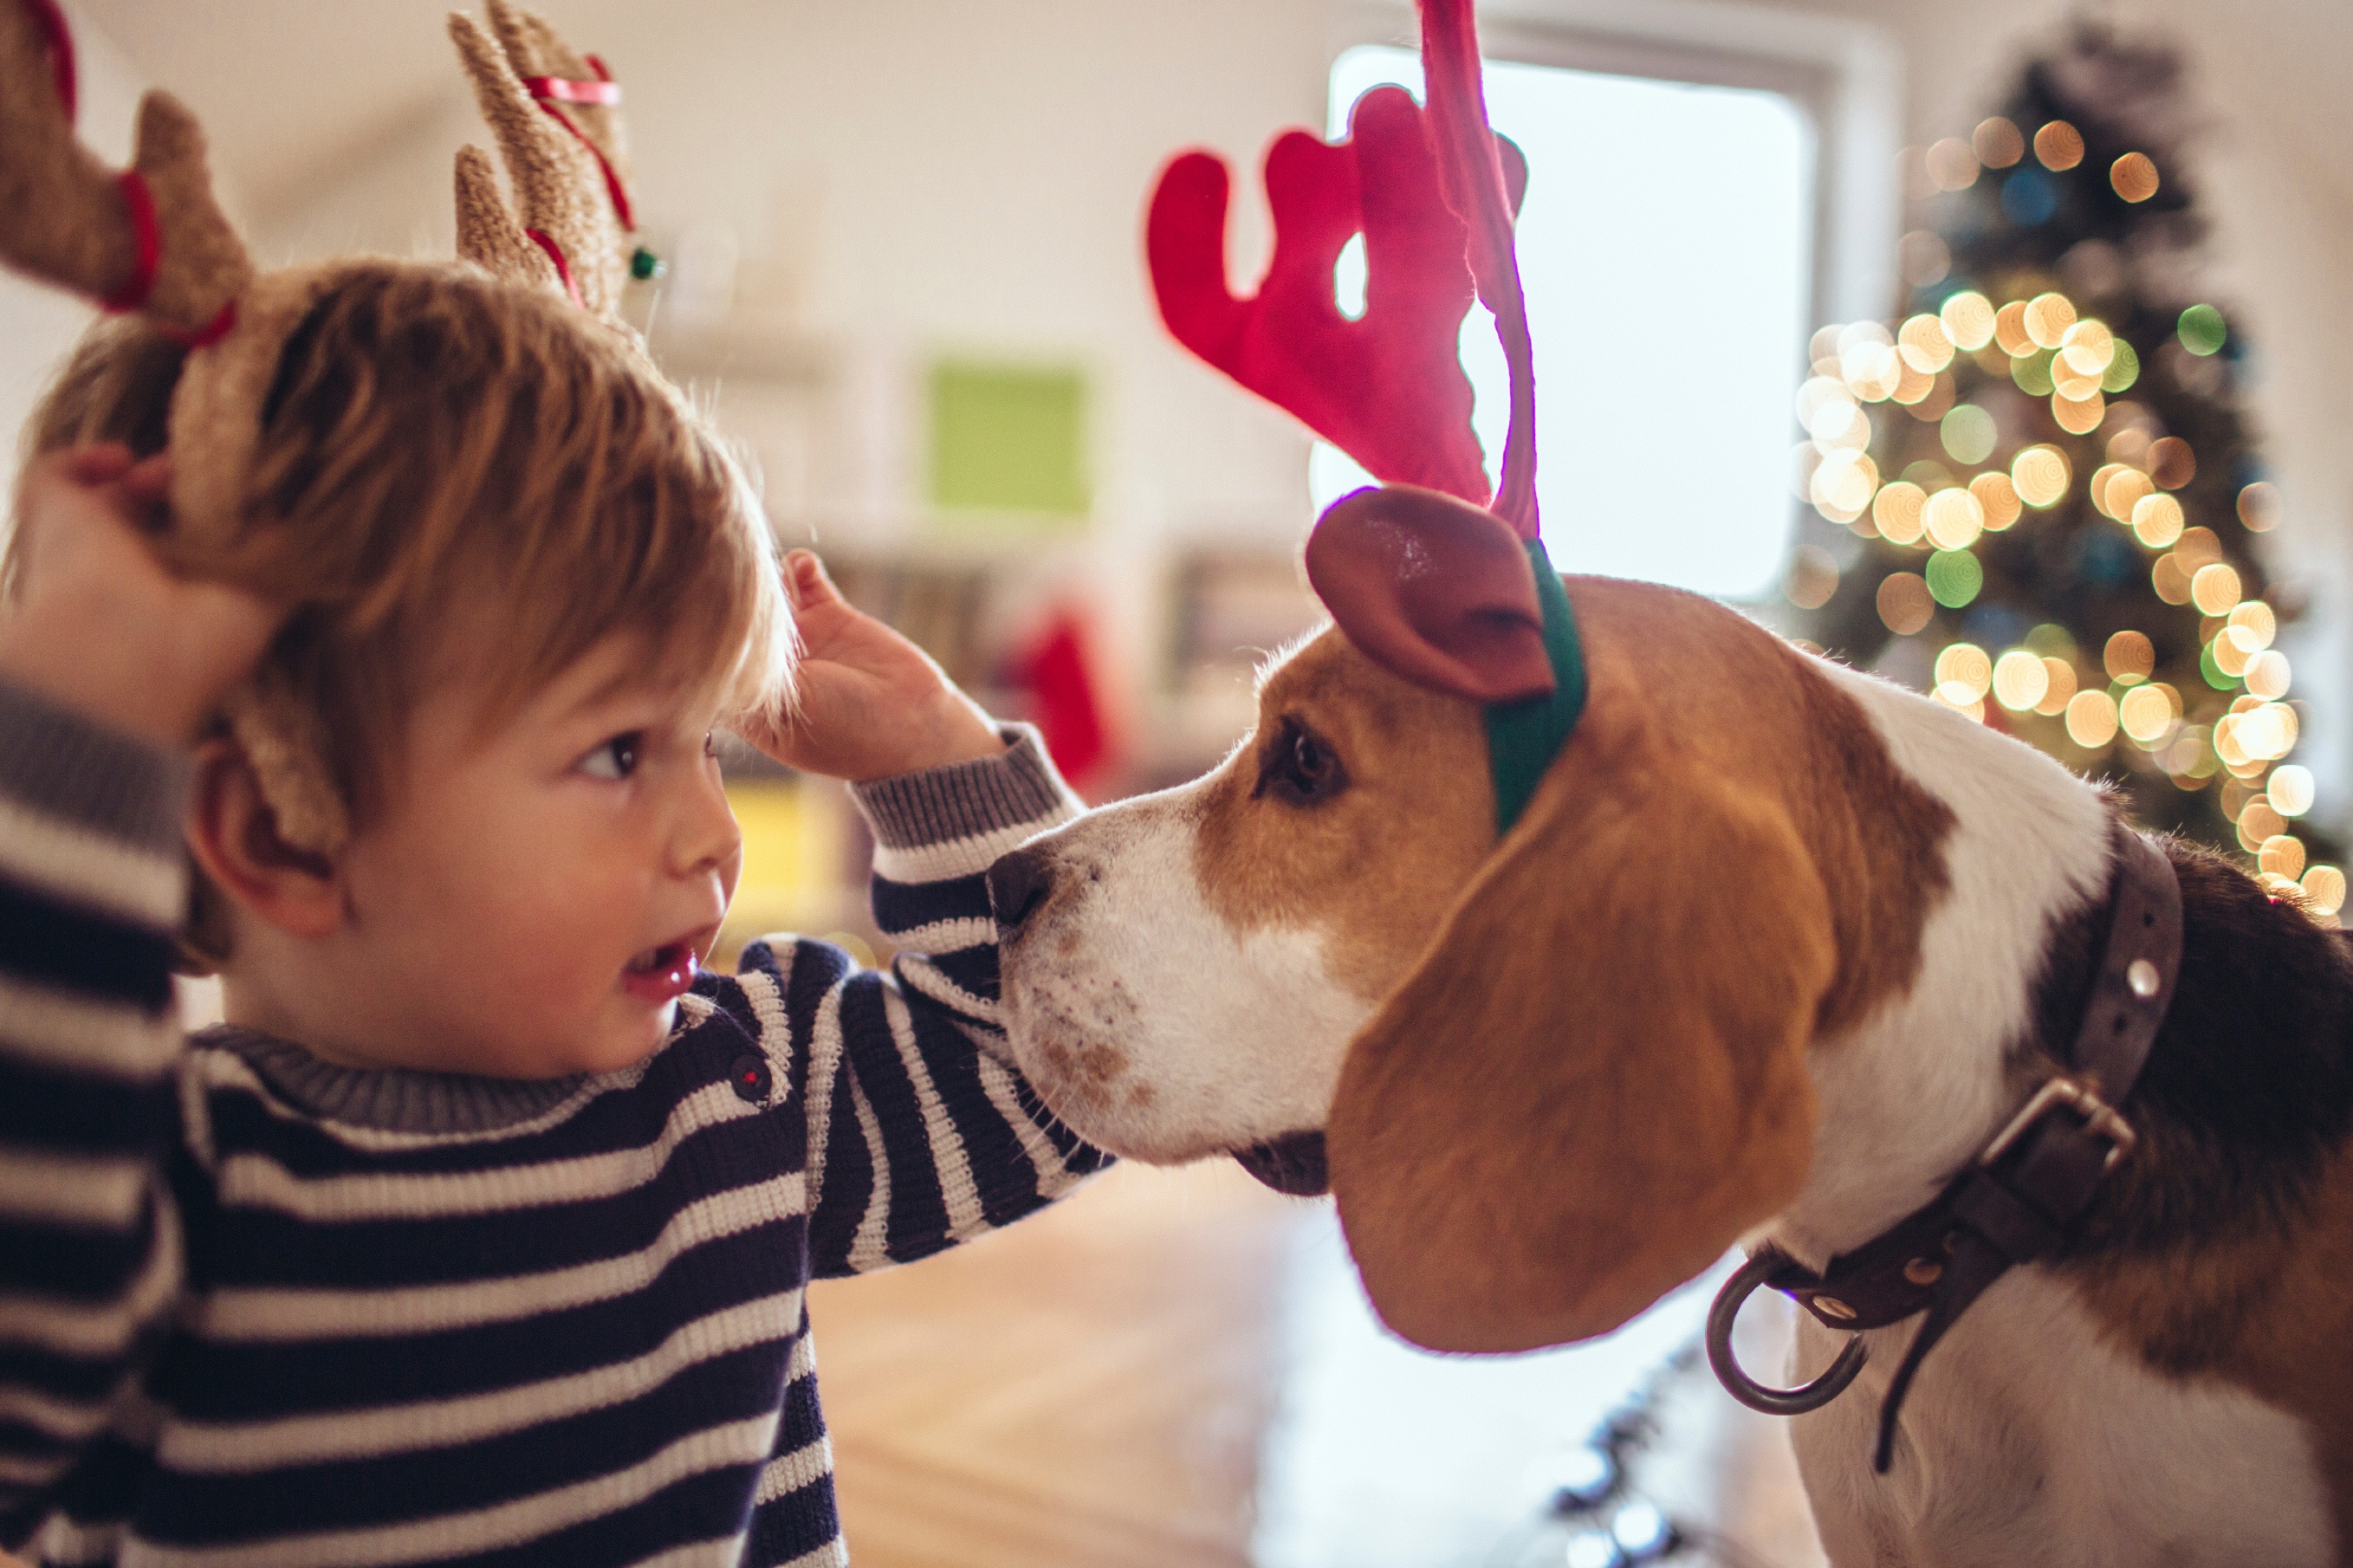 Little boy and his dog with reindeer antlers